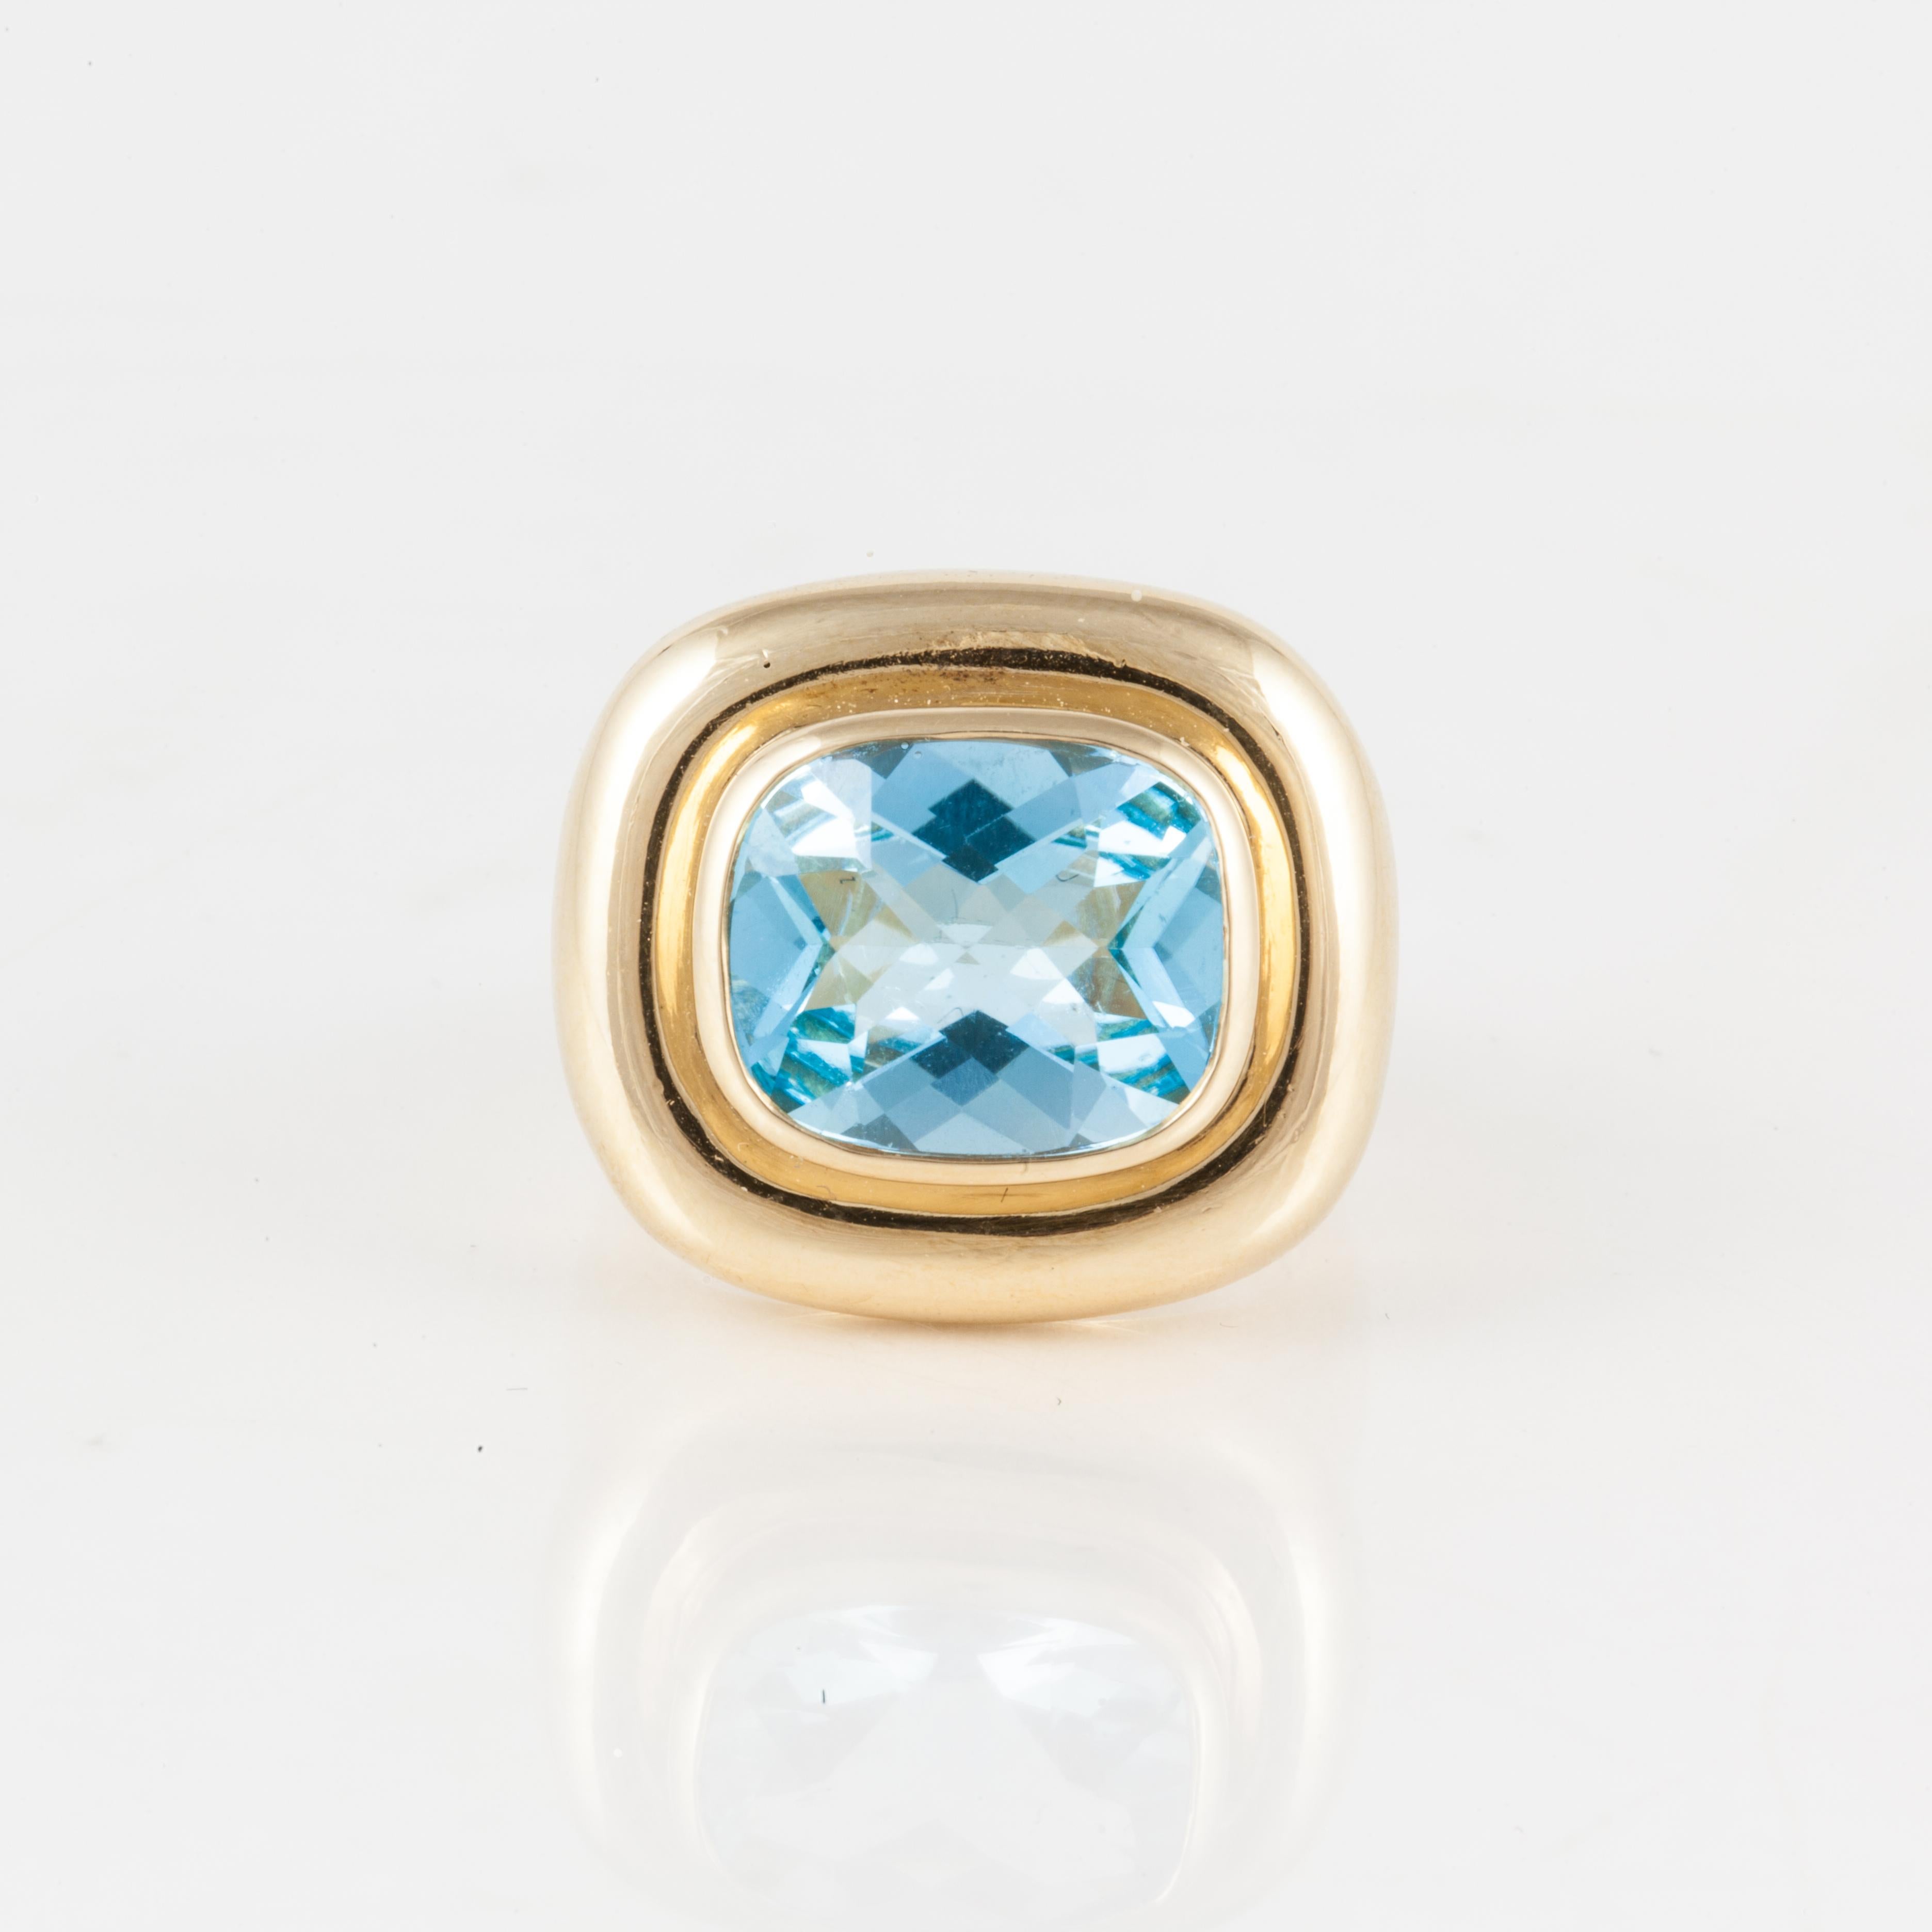 18K yellow gold ring by Paloma Picasso for Tiffany, featuring a cushion-cut blue topaz which totals 6.50 carats.  Presentation area measures 3/4 of an inch by 11/16 of an inch.  The ring is currently a size 5.